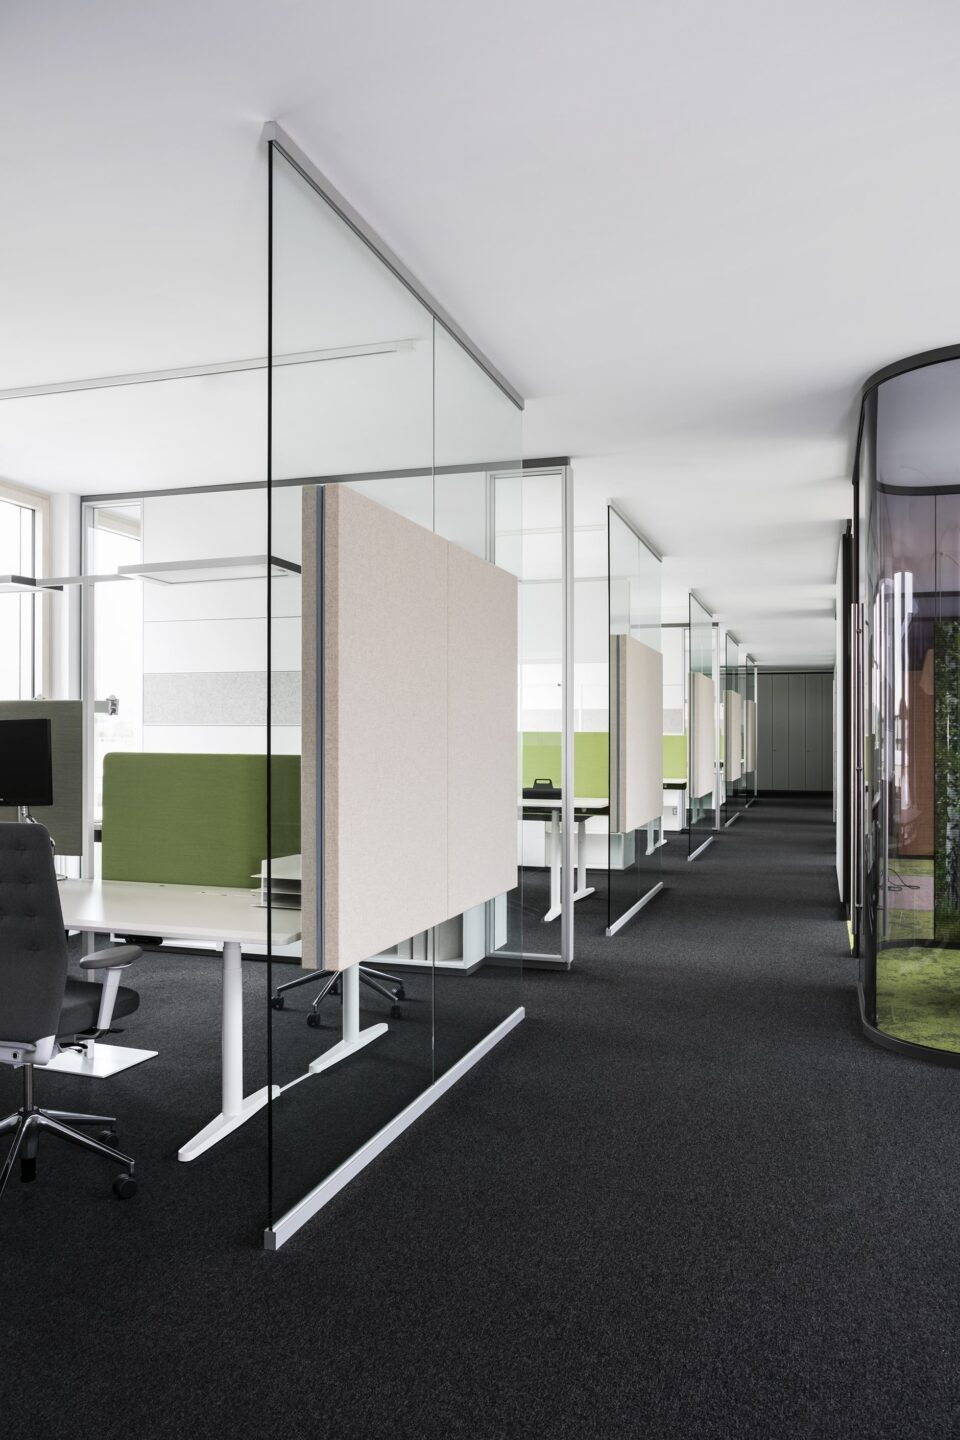 IdeenReich at feco-forum Karlsruhe │ modern workplaces │ glass walls from feco